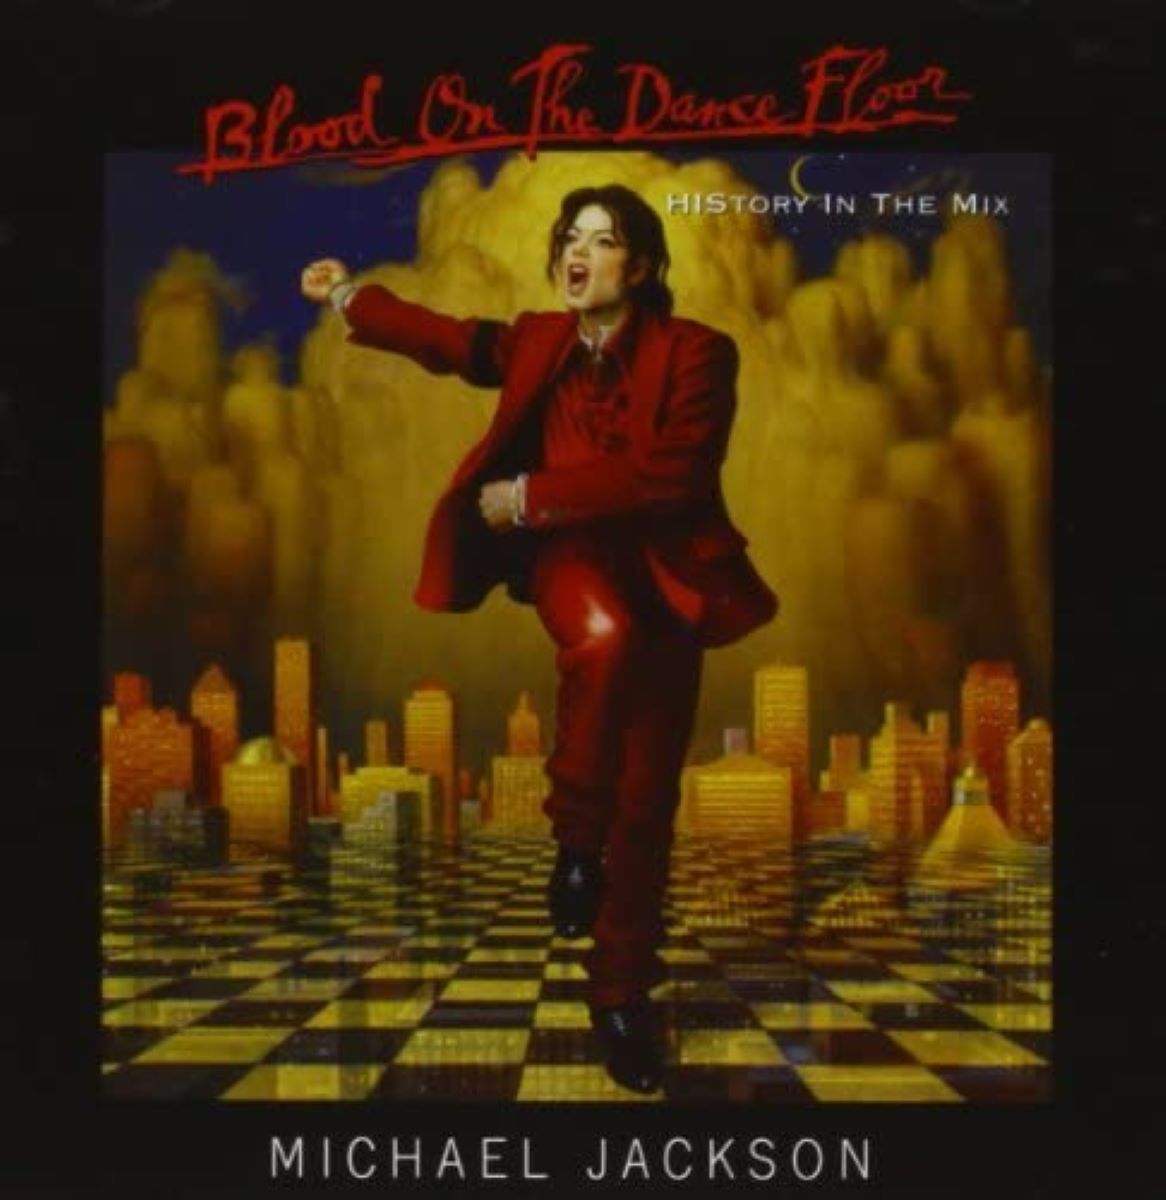 09. Blood on the Dance Floor : History in the Mix (1997)